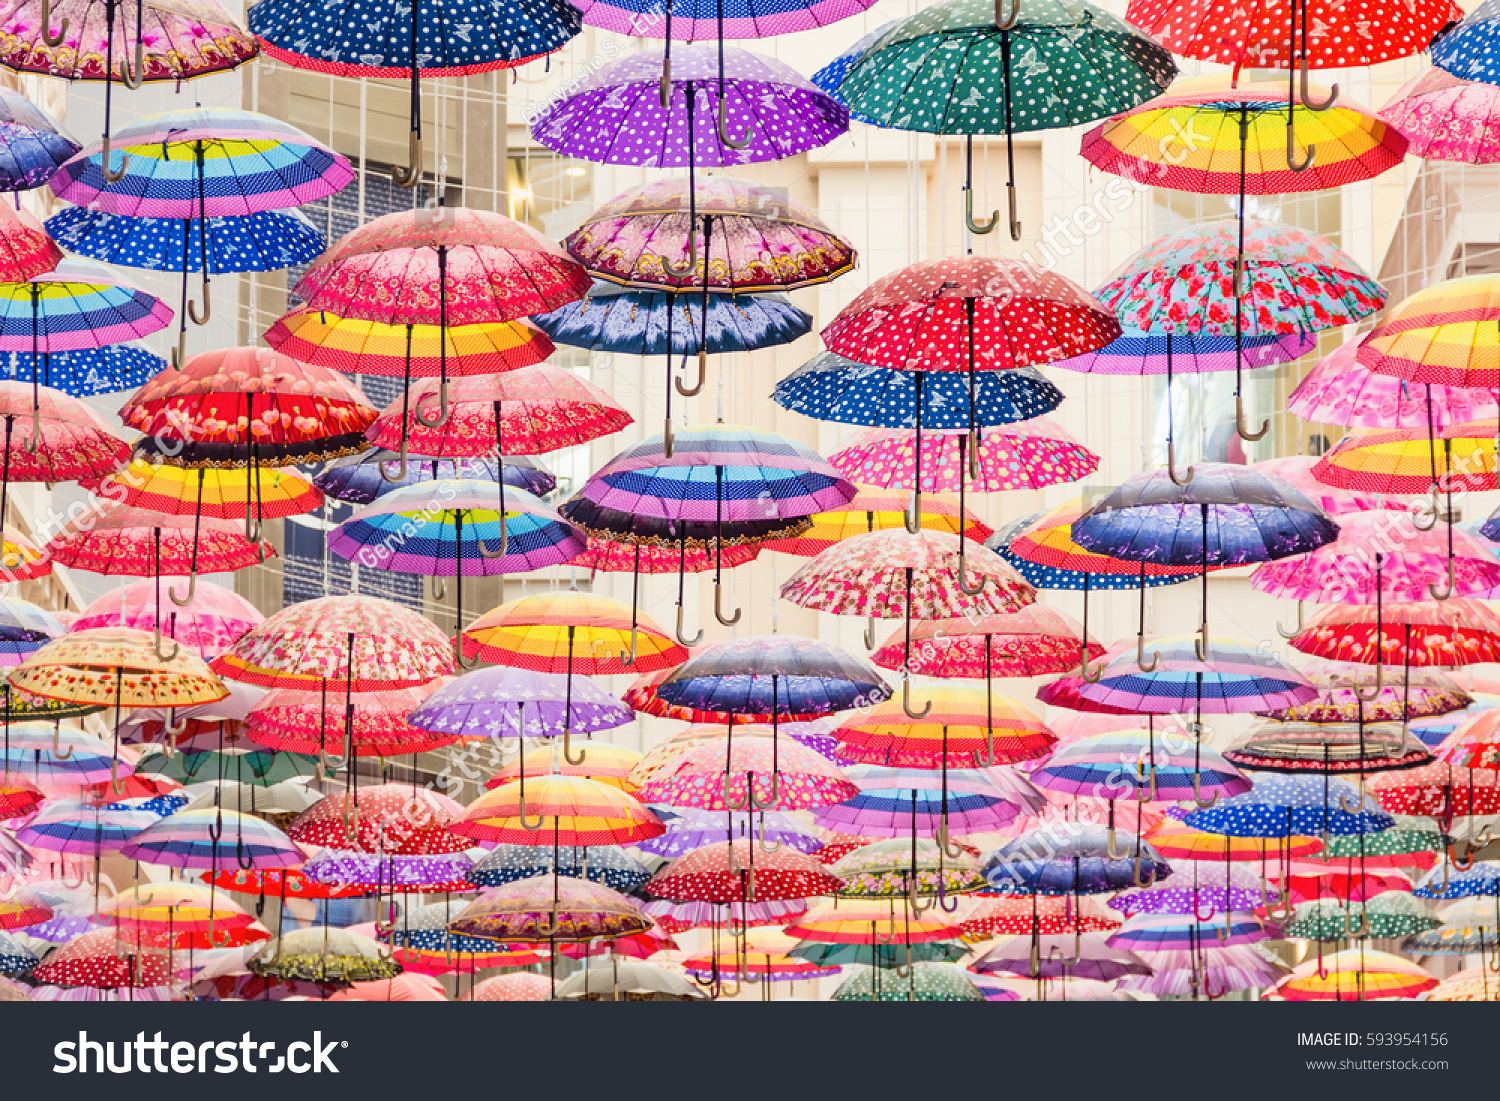 Colorful Umbrellas On Ceiling Largest Mall Stock Photo Edit Now